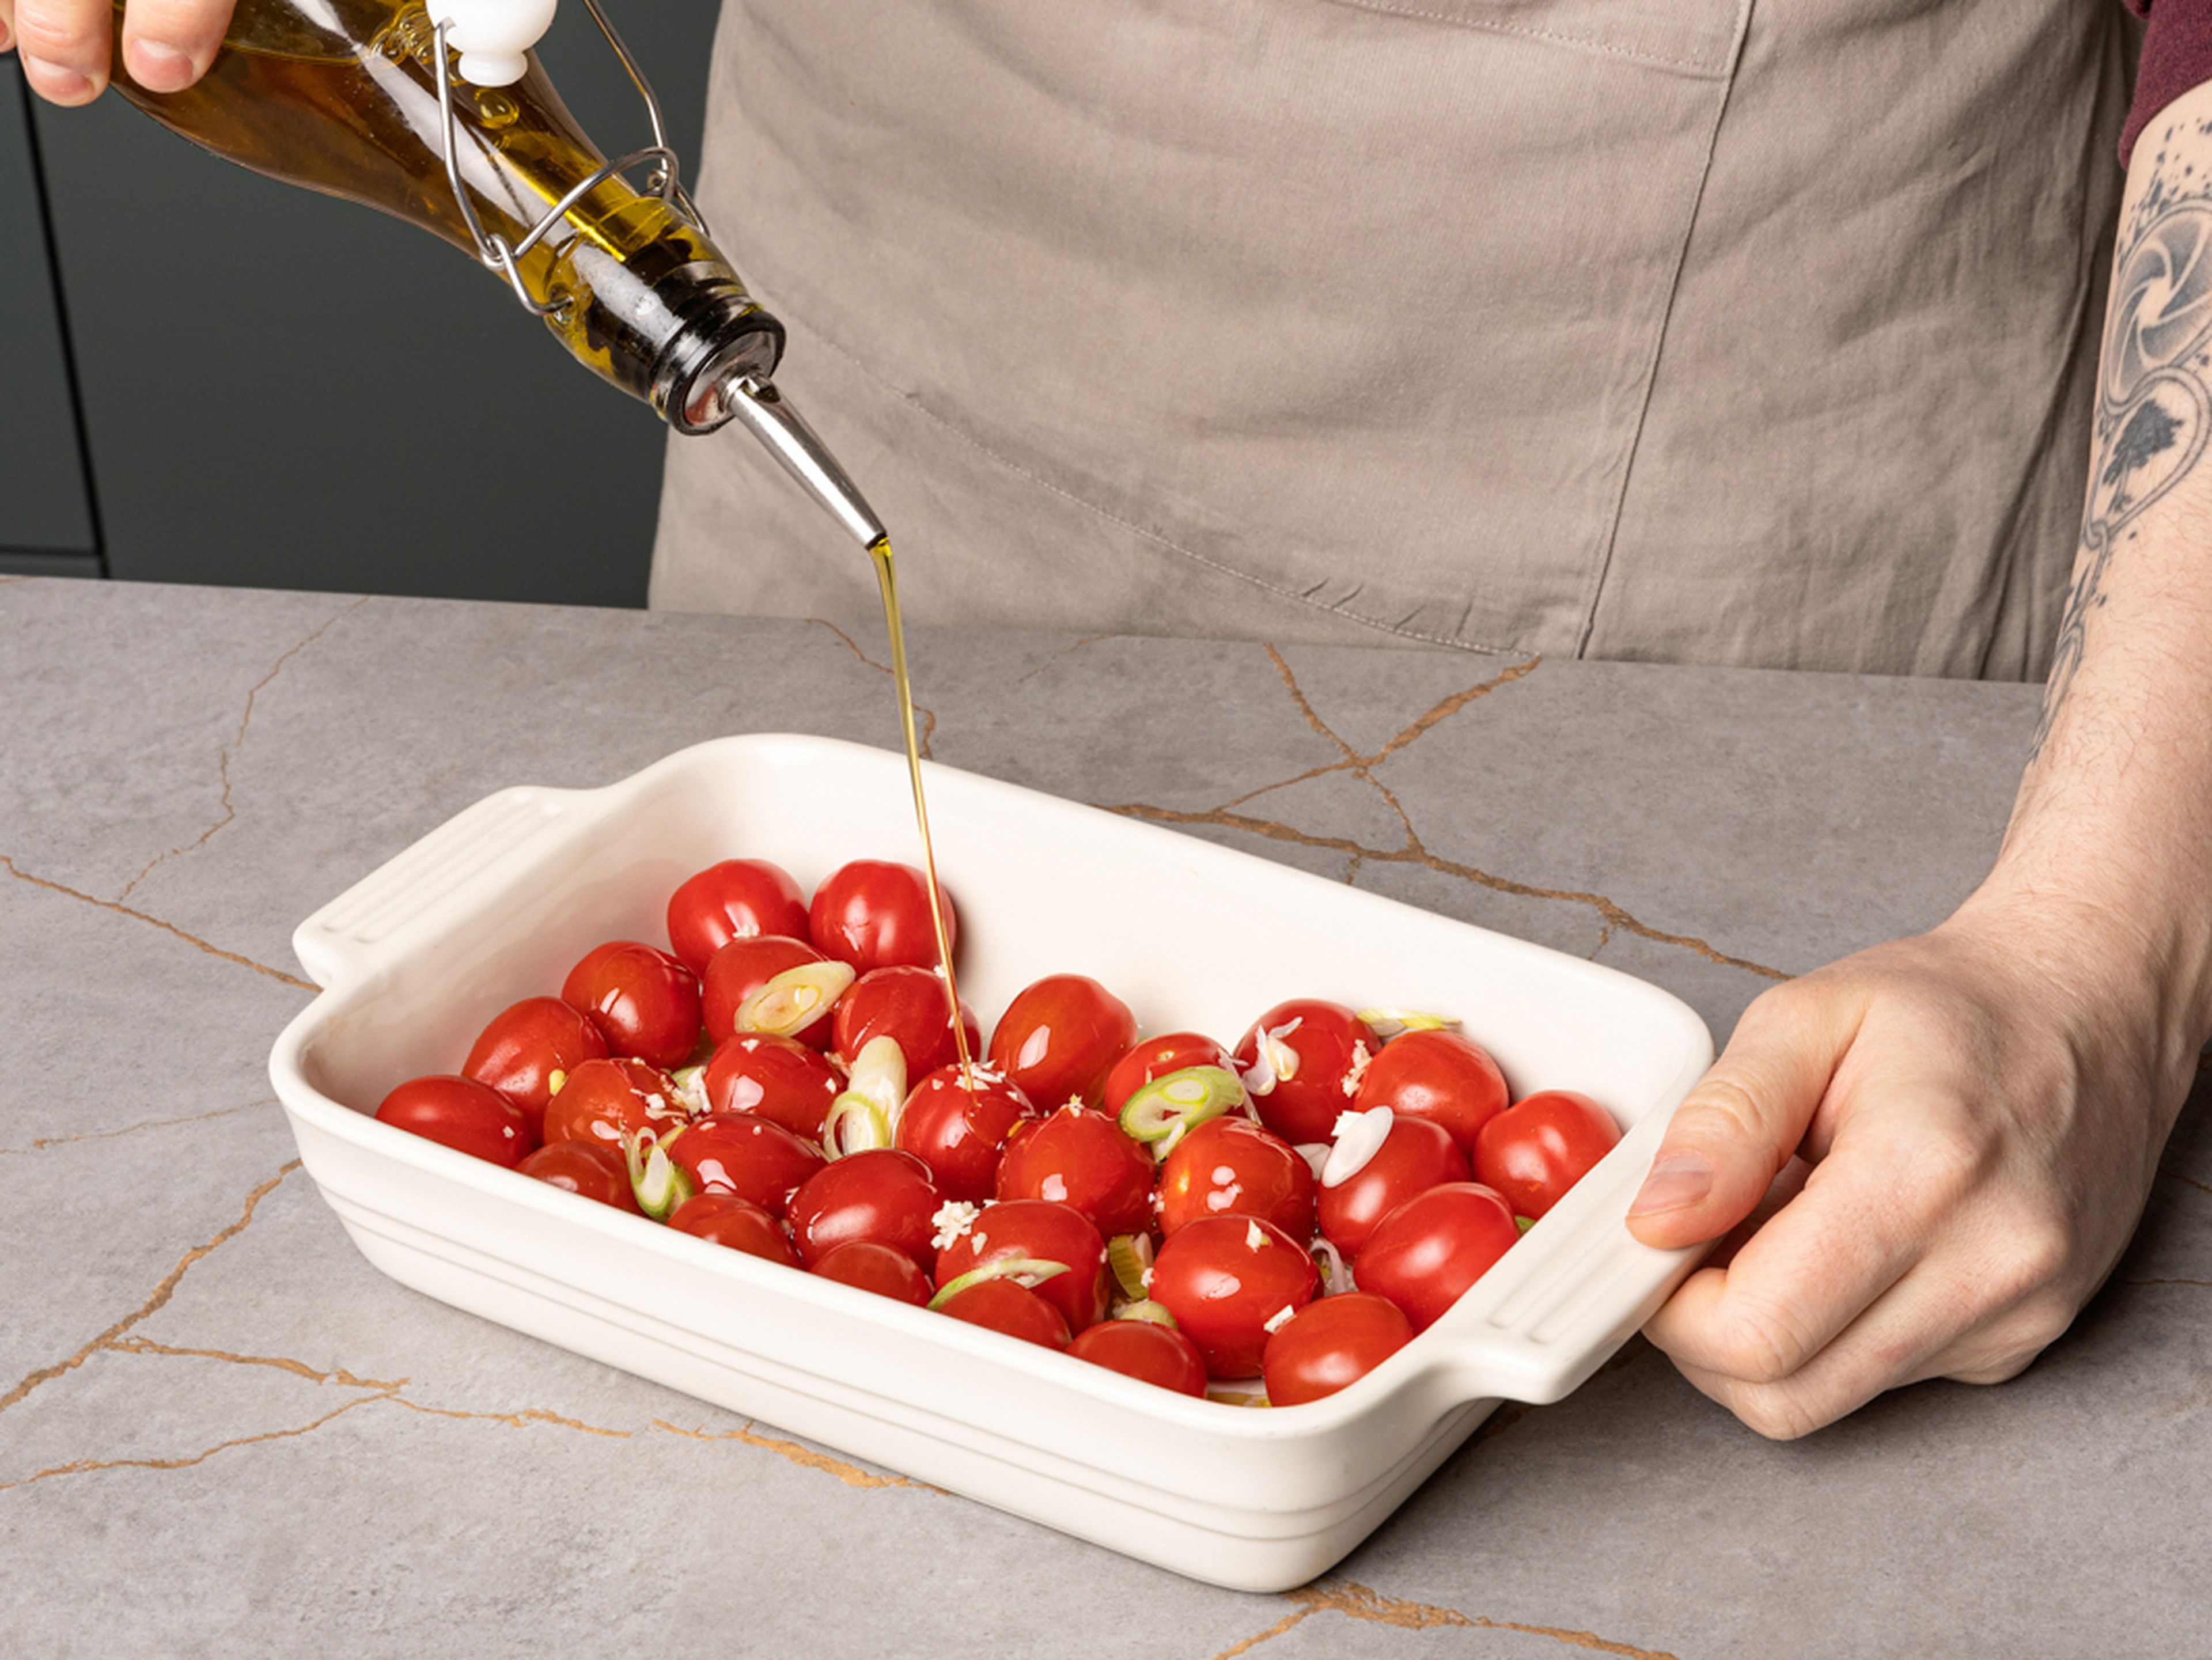 Place the cherry tomatoes in a baking dish and mix with the minced garlic, scallion whites and vegetable oil and season with salt. Bake in the preheated oven for approx. 15–18 min. until the tomatoes are softened and starting to burst open. Meanwhile, continue with the recipe.